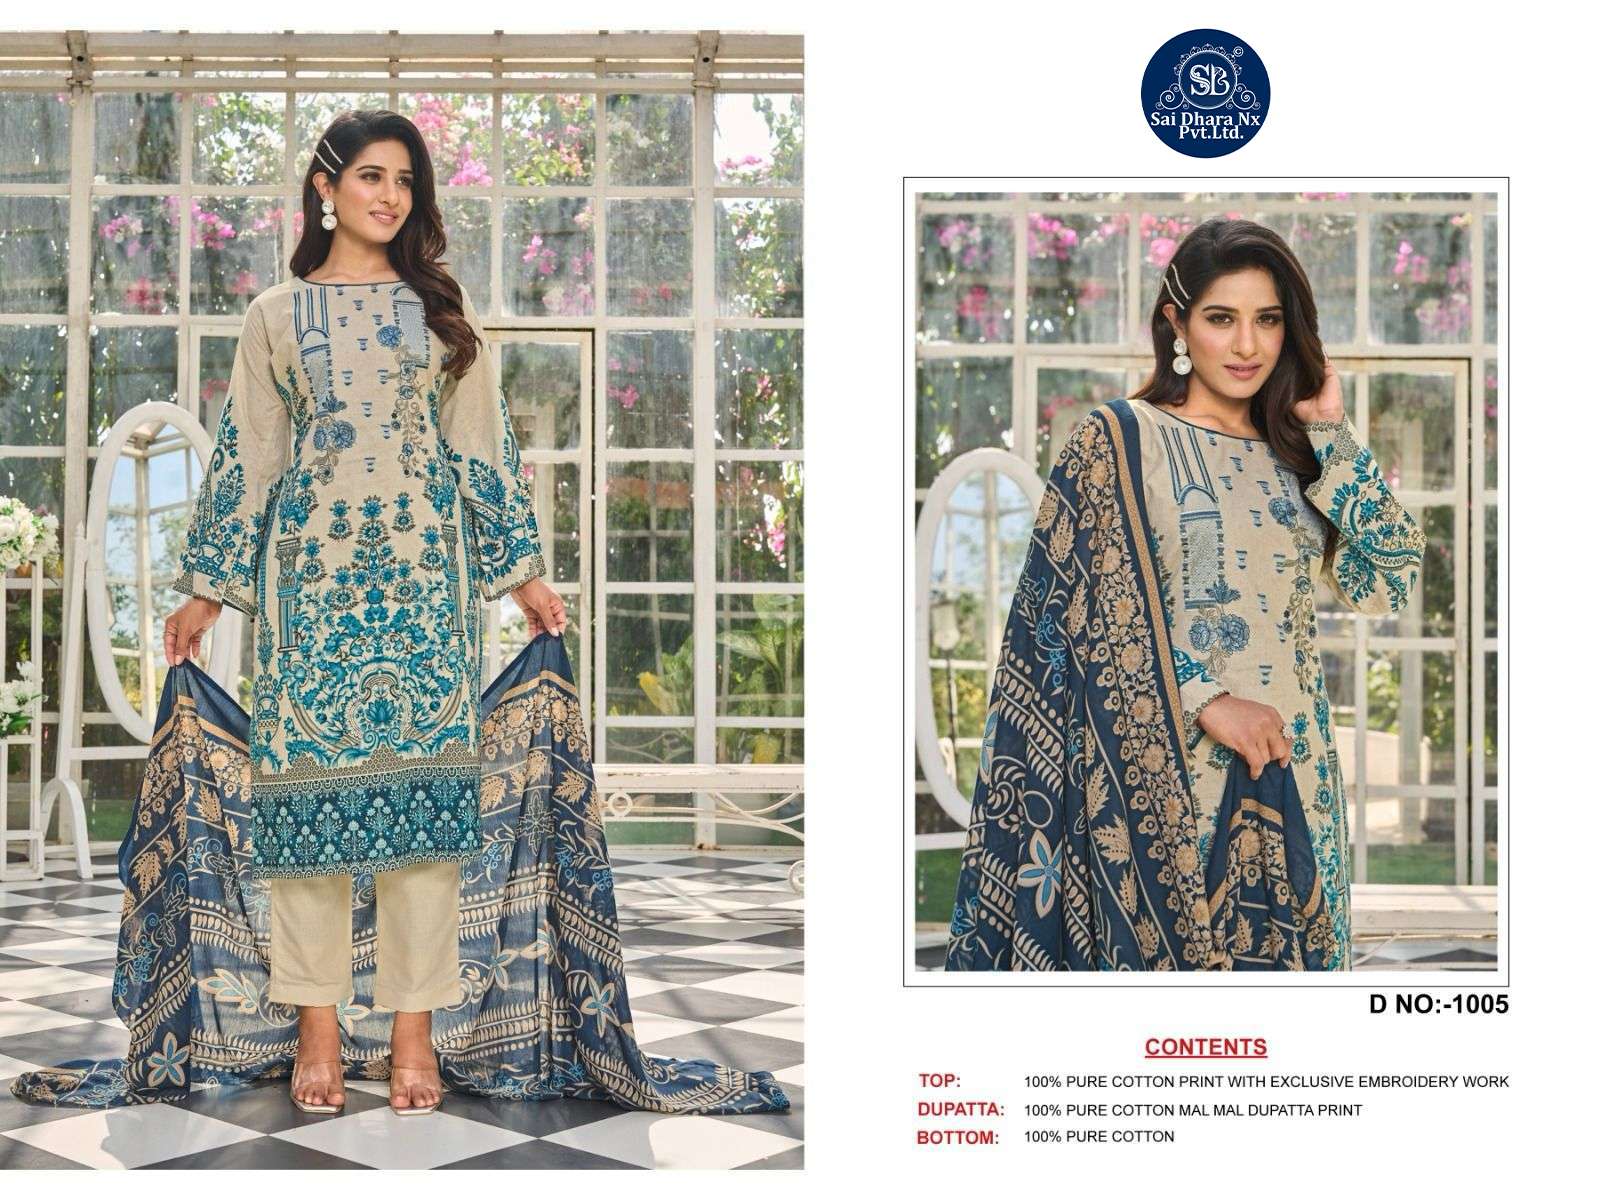 RAZZO EXPORTS PRESENTS PURE COTTON DIGITAL PRINT WITH HEAVY EMBROIDERY 3 PIECE PAKISTANI SUIT MATERIAL WHOLESALE SHOP IN SURAT - SaiDharaNx